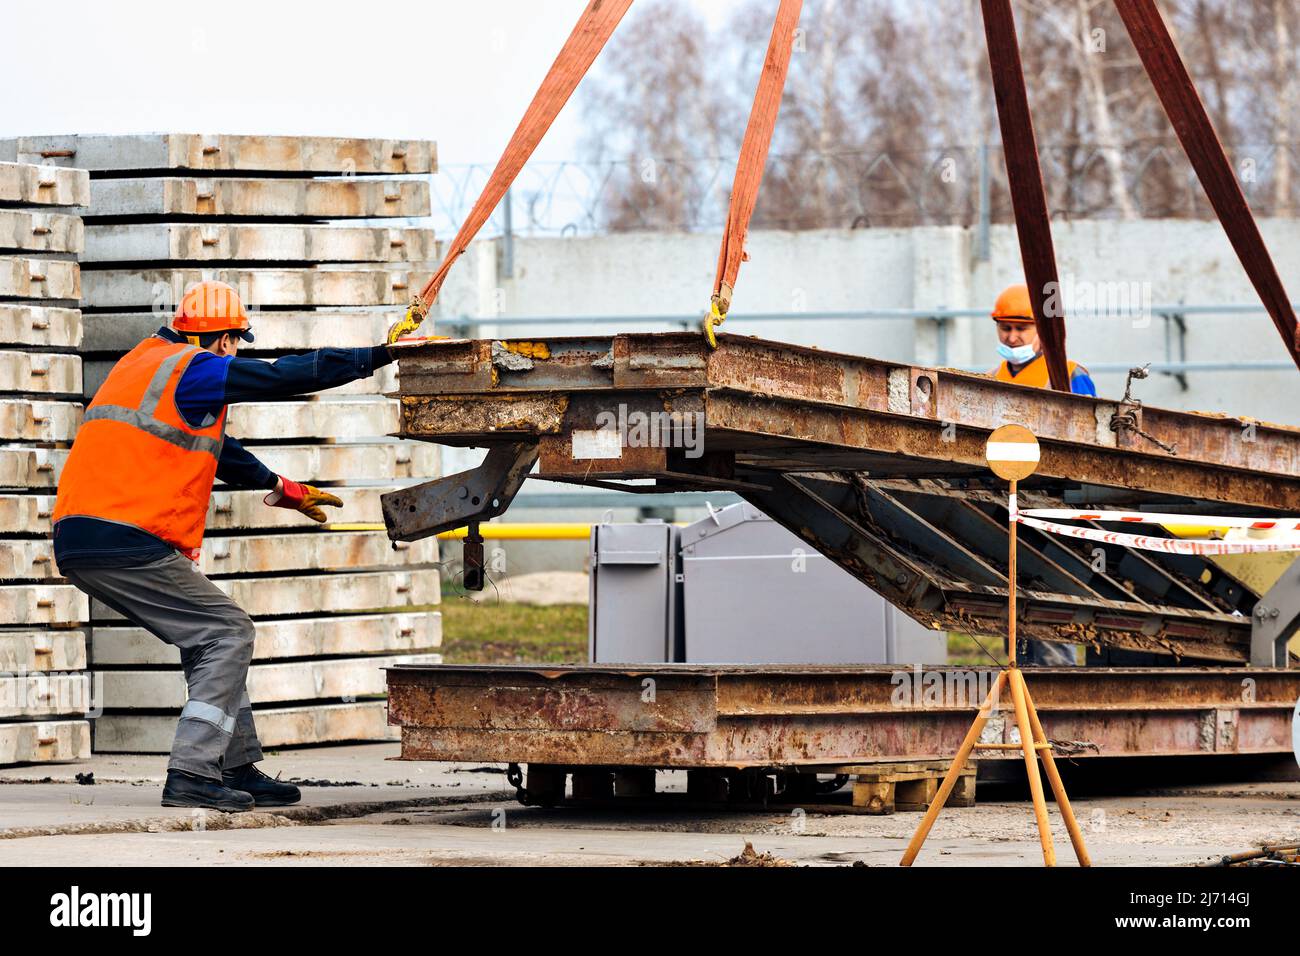 Slinger in helmet and vest controls unloading of metal structures on construction site. White handyman unloads load. Stock Photo